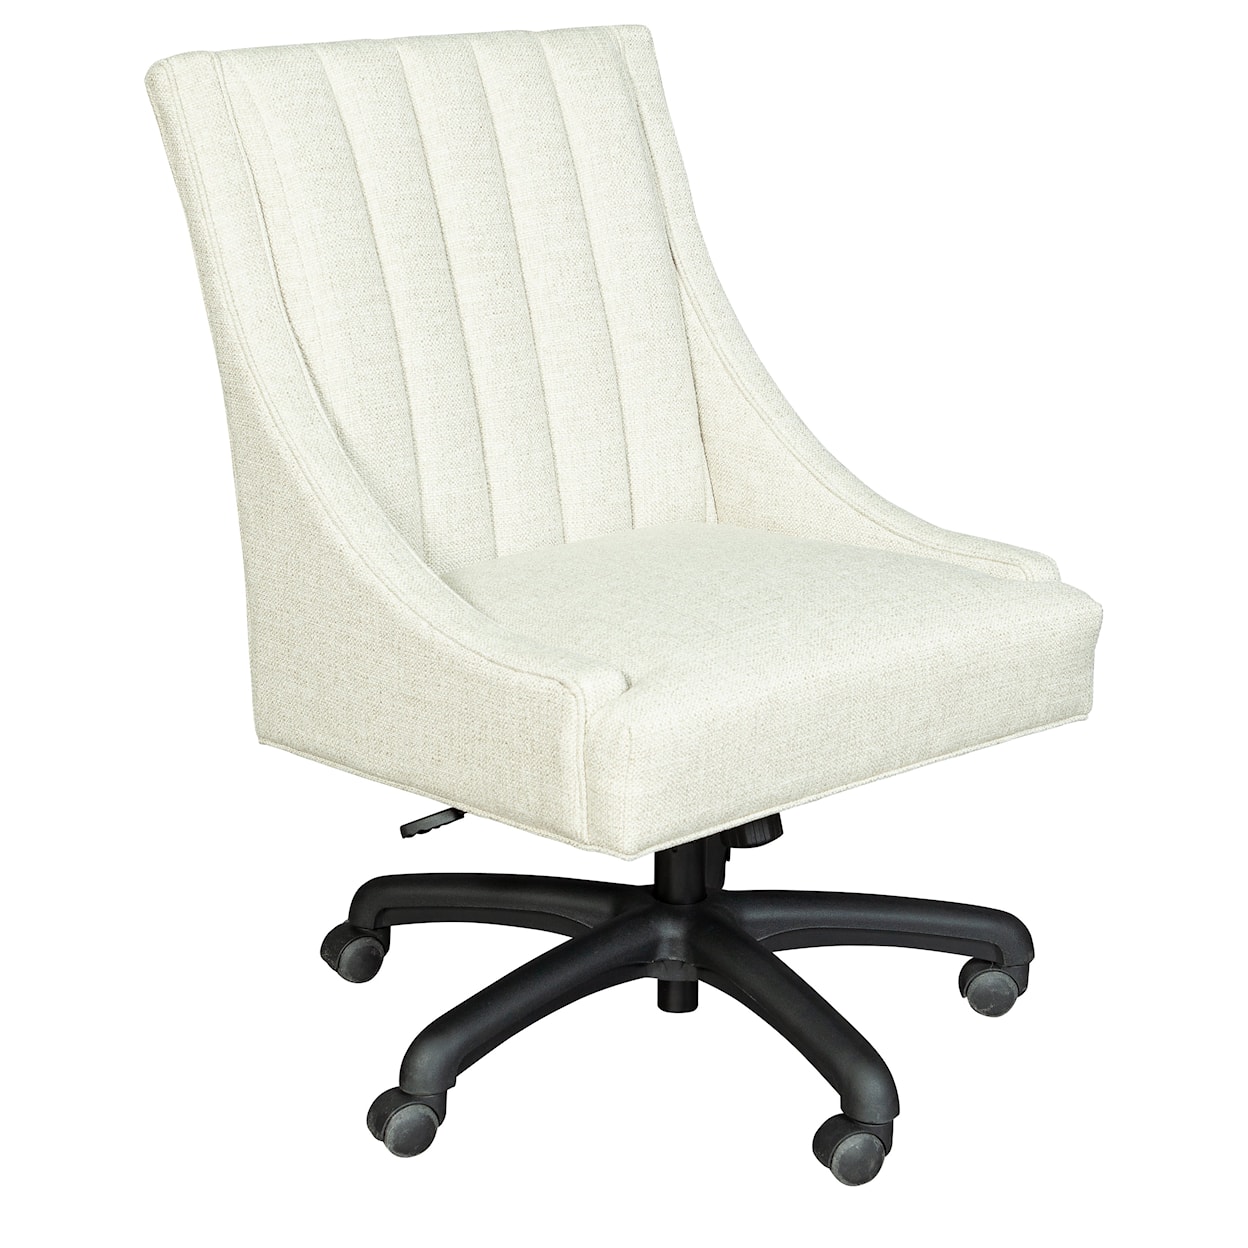 Hekman Upholstery Nathan Office Chair with Tufted Back